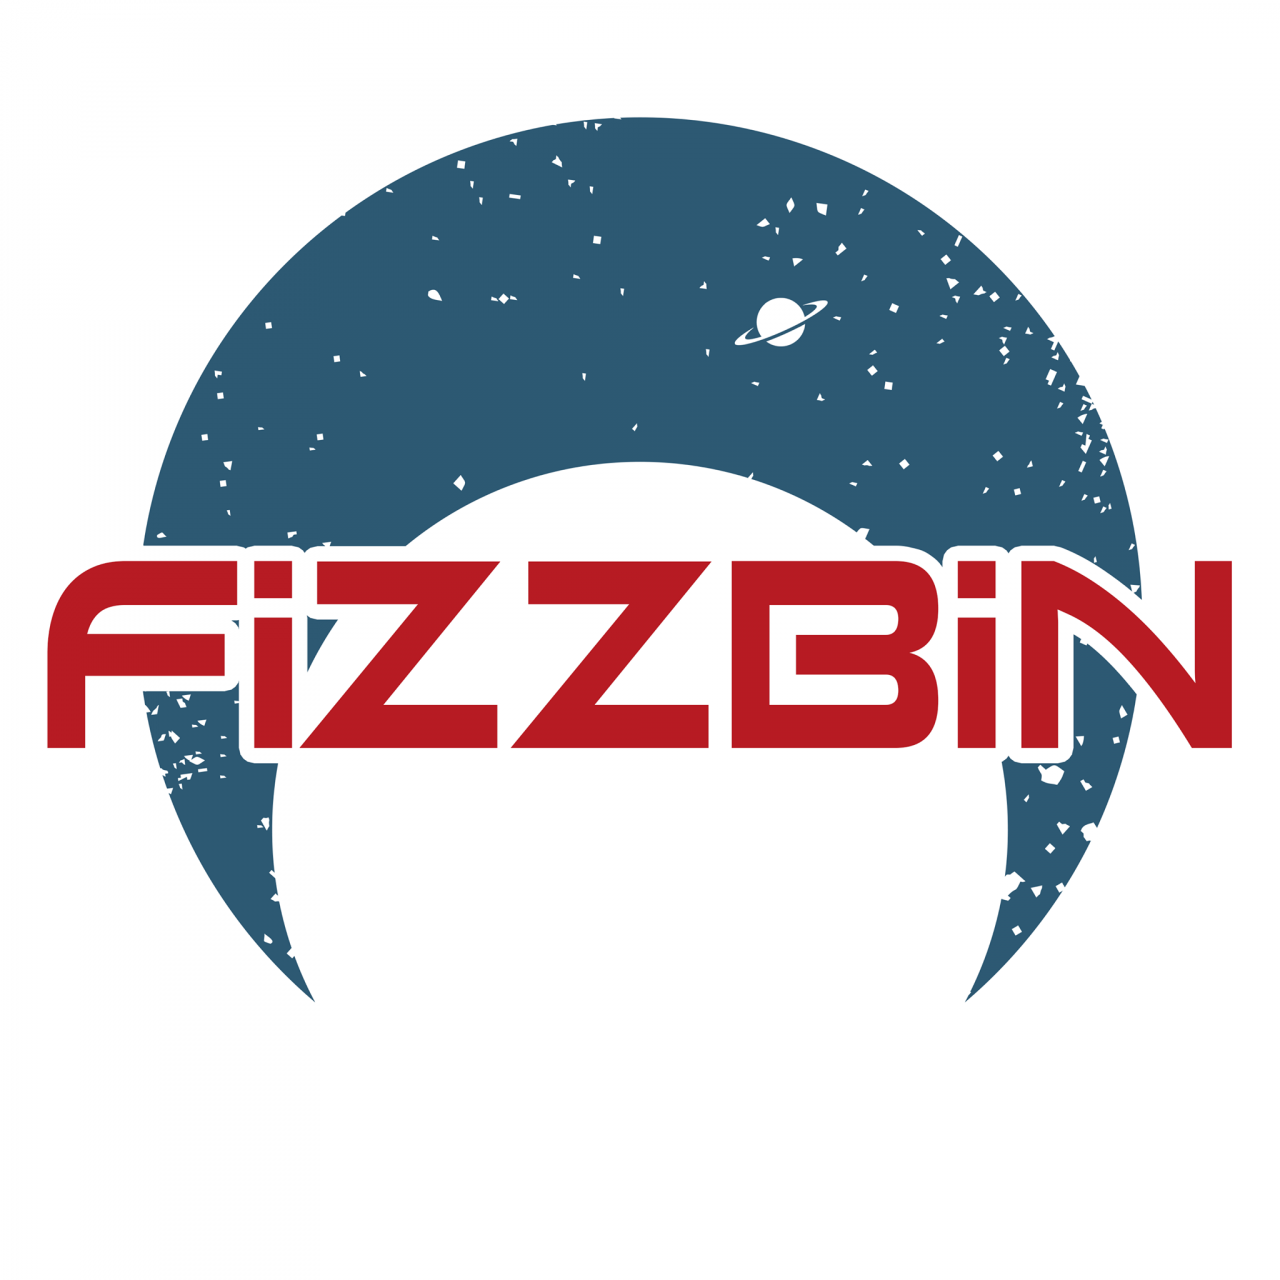 Welcome to the World of Fizzbin!